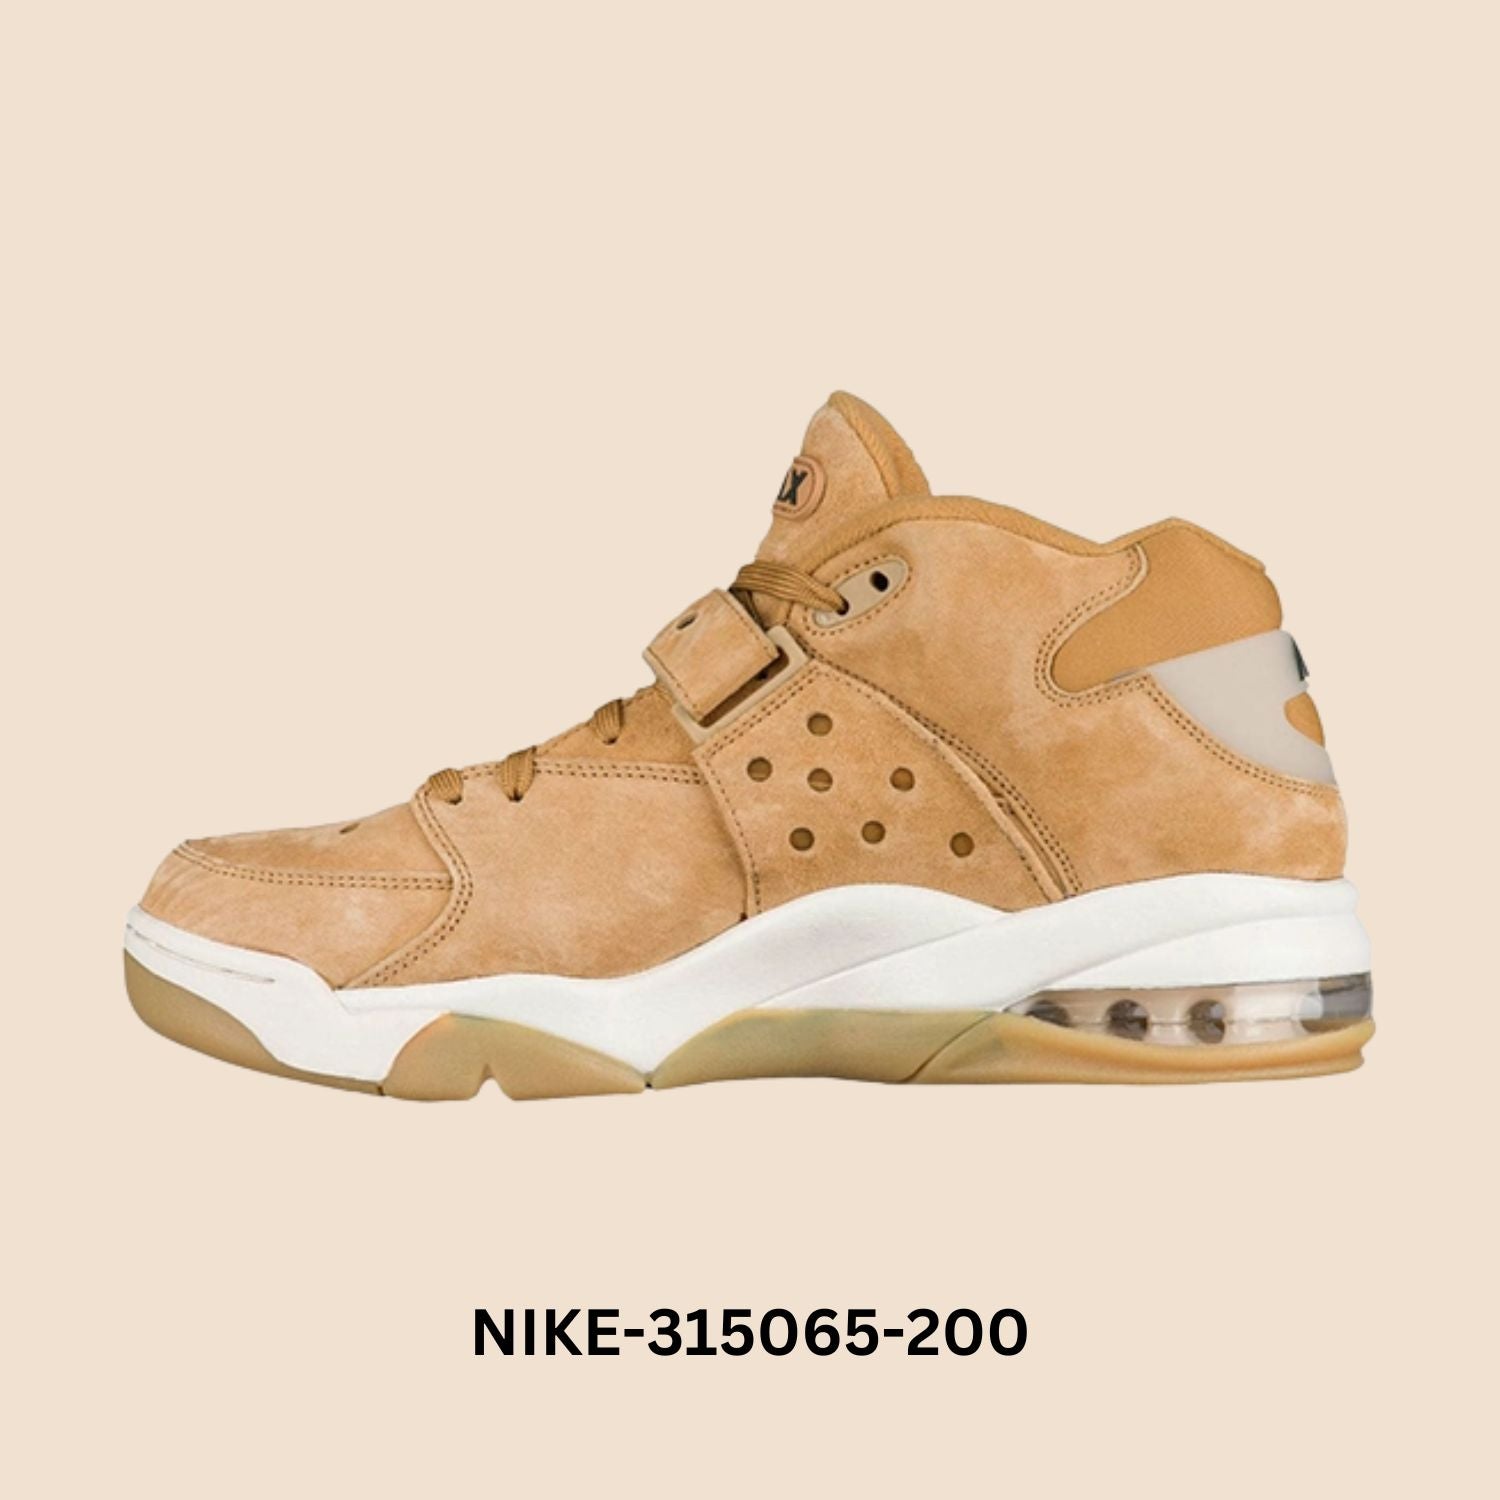 Nike Air Force Max "Flax" Men's Style# 315065-200